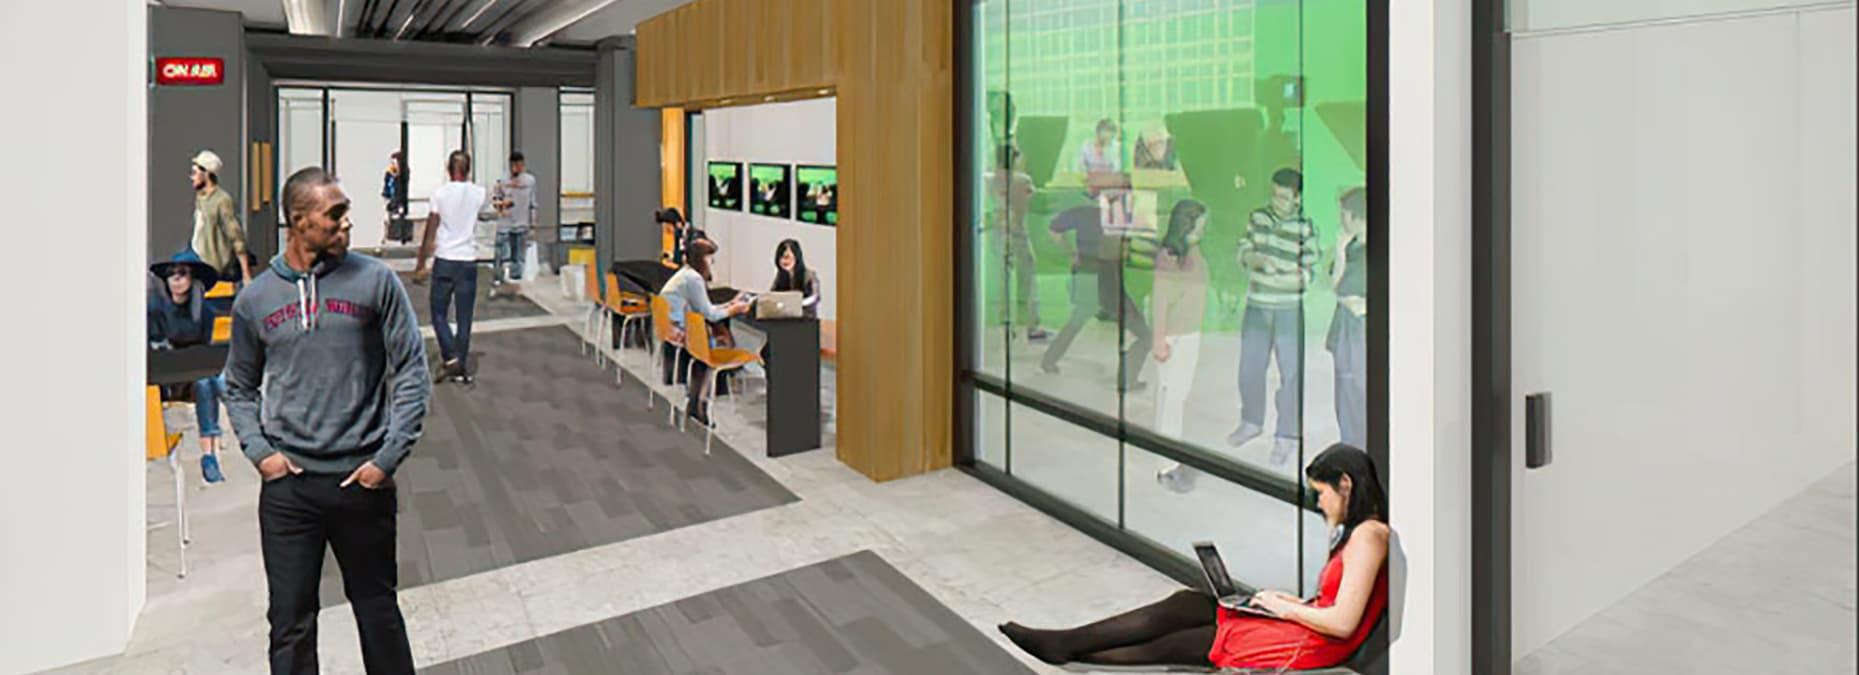 rendering center hallway with students walking around the area with one wall being open as a window